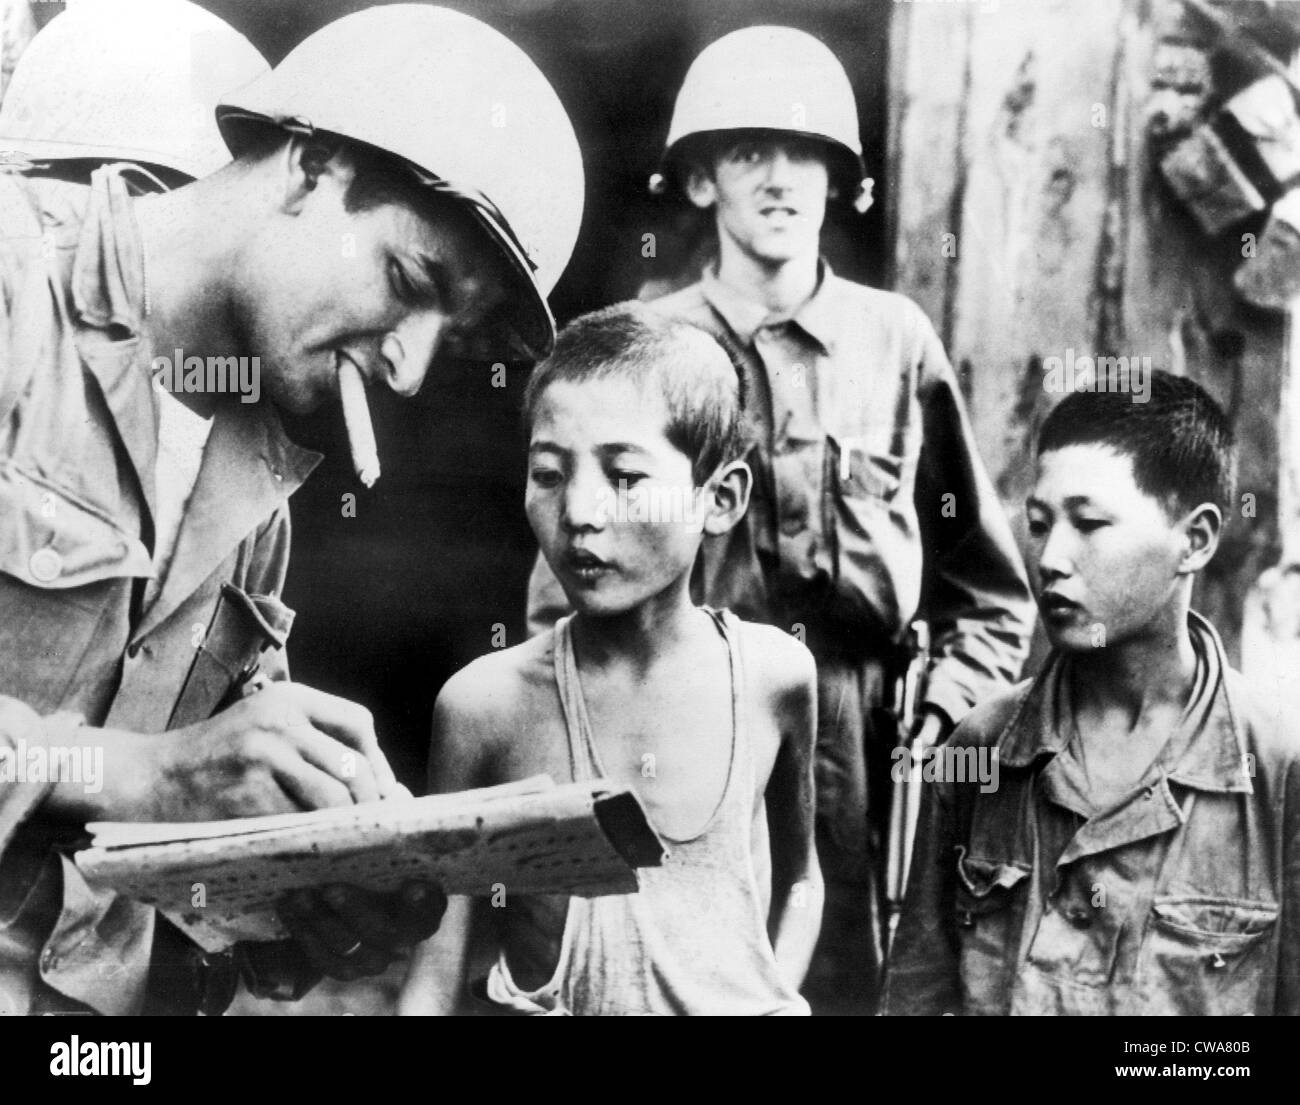 SOMEWHERE IN KOREA, 10/6/50: Two North Korean boys, serving in North Korean Army, are interrogated by a GI after their Stock Photo